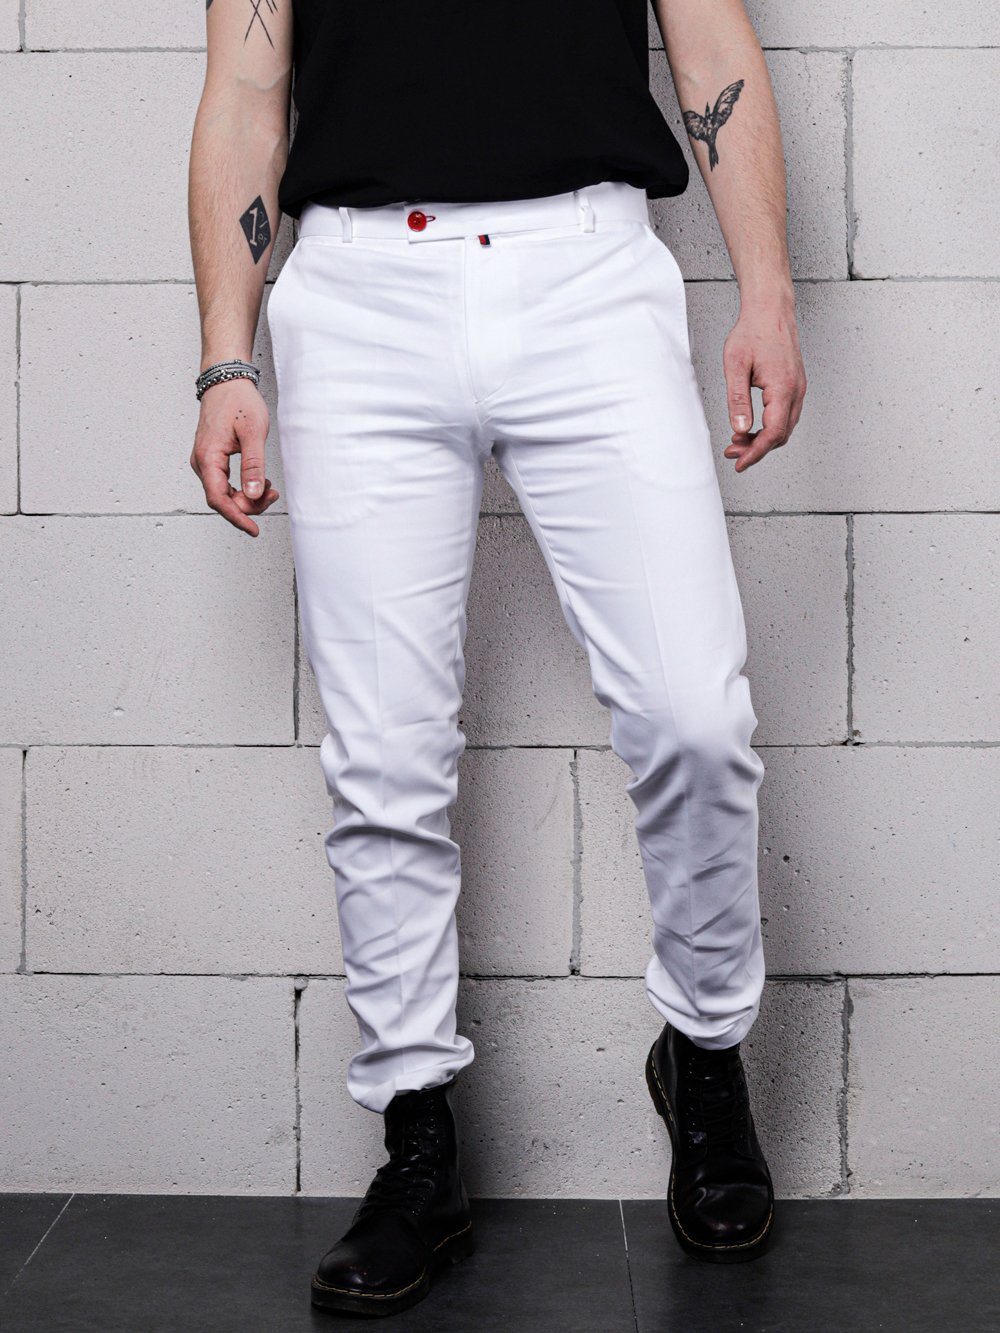 A man wearing cream Frappuccino pants and a black shirt.